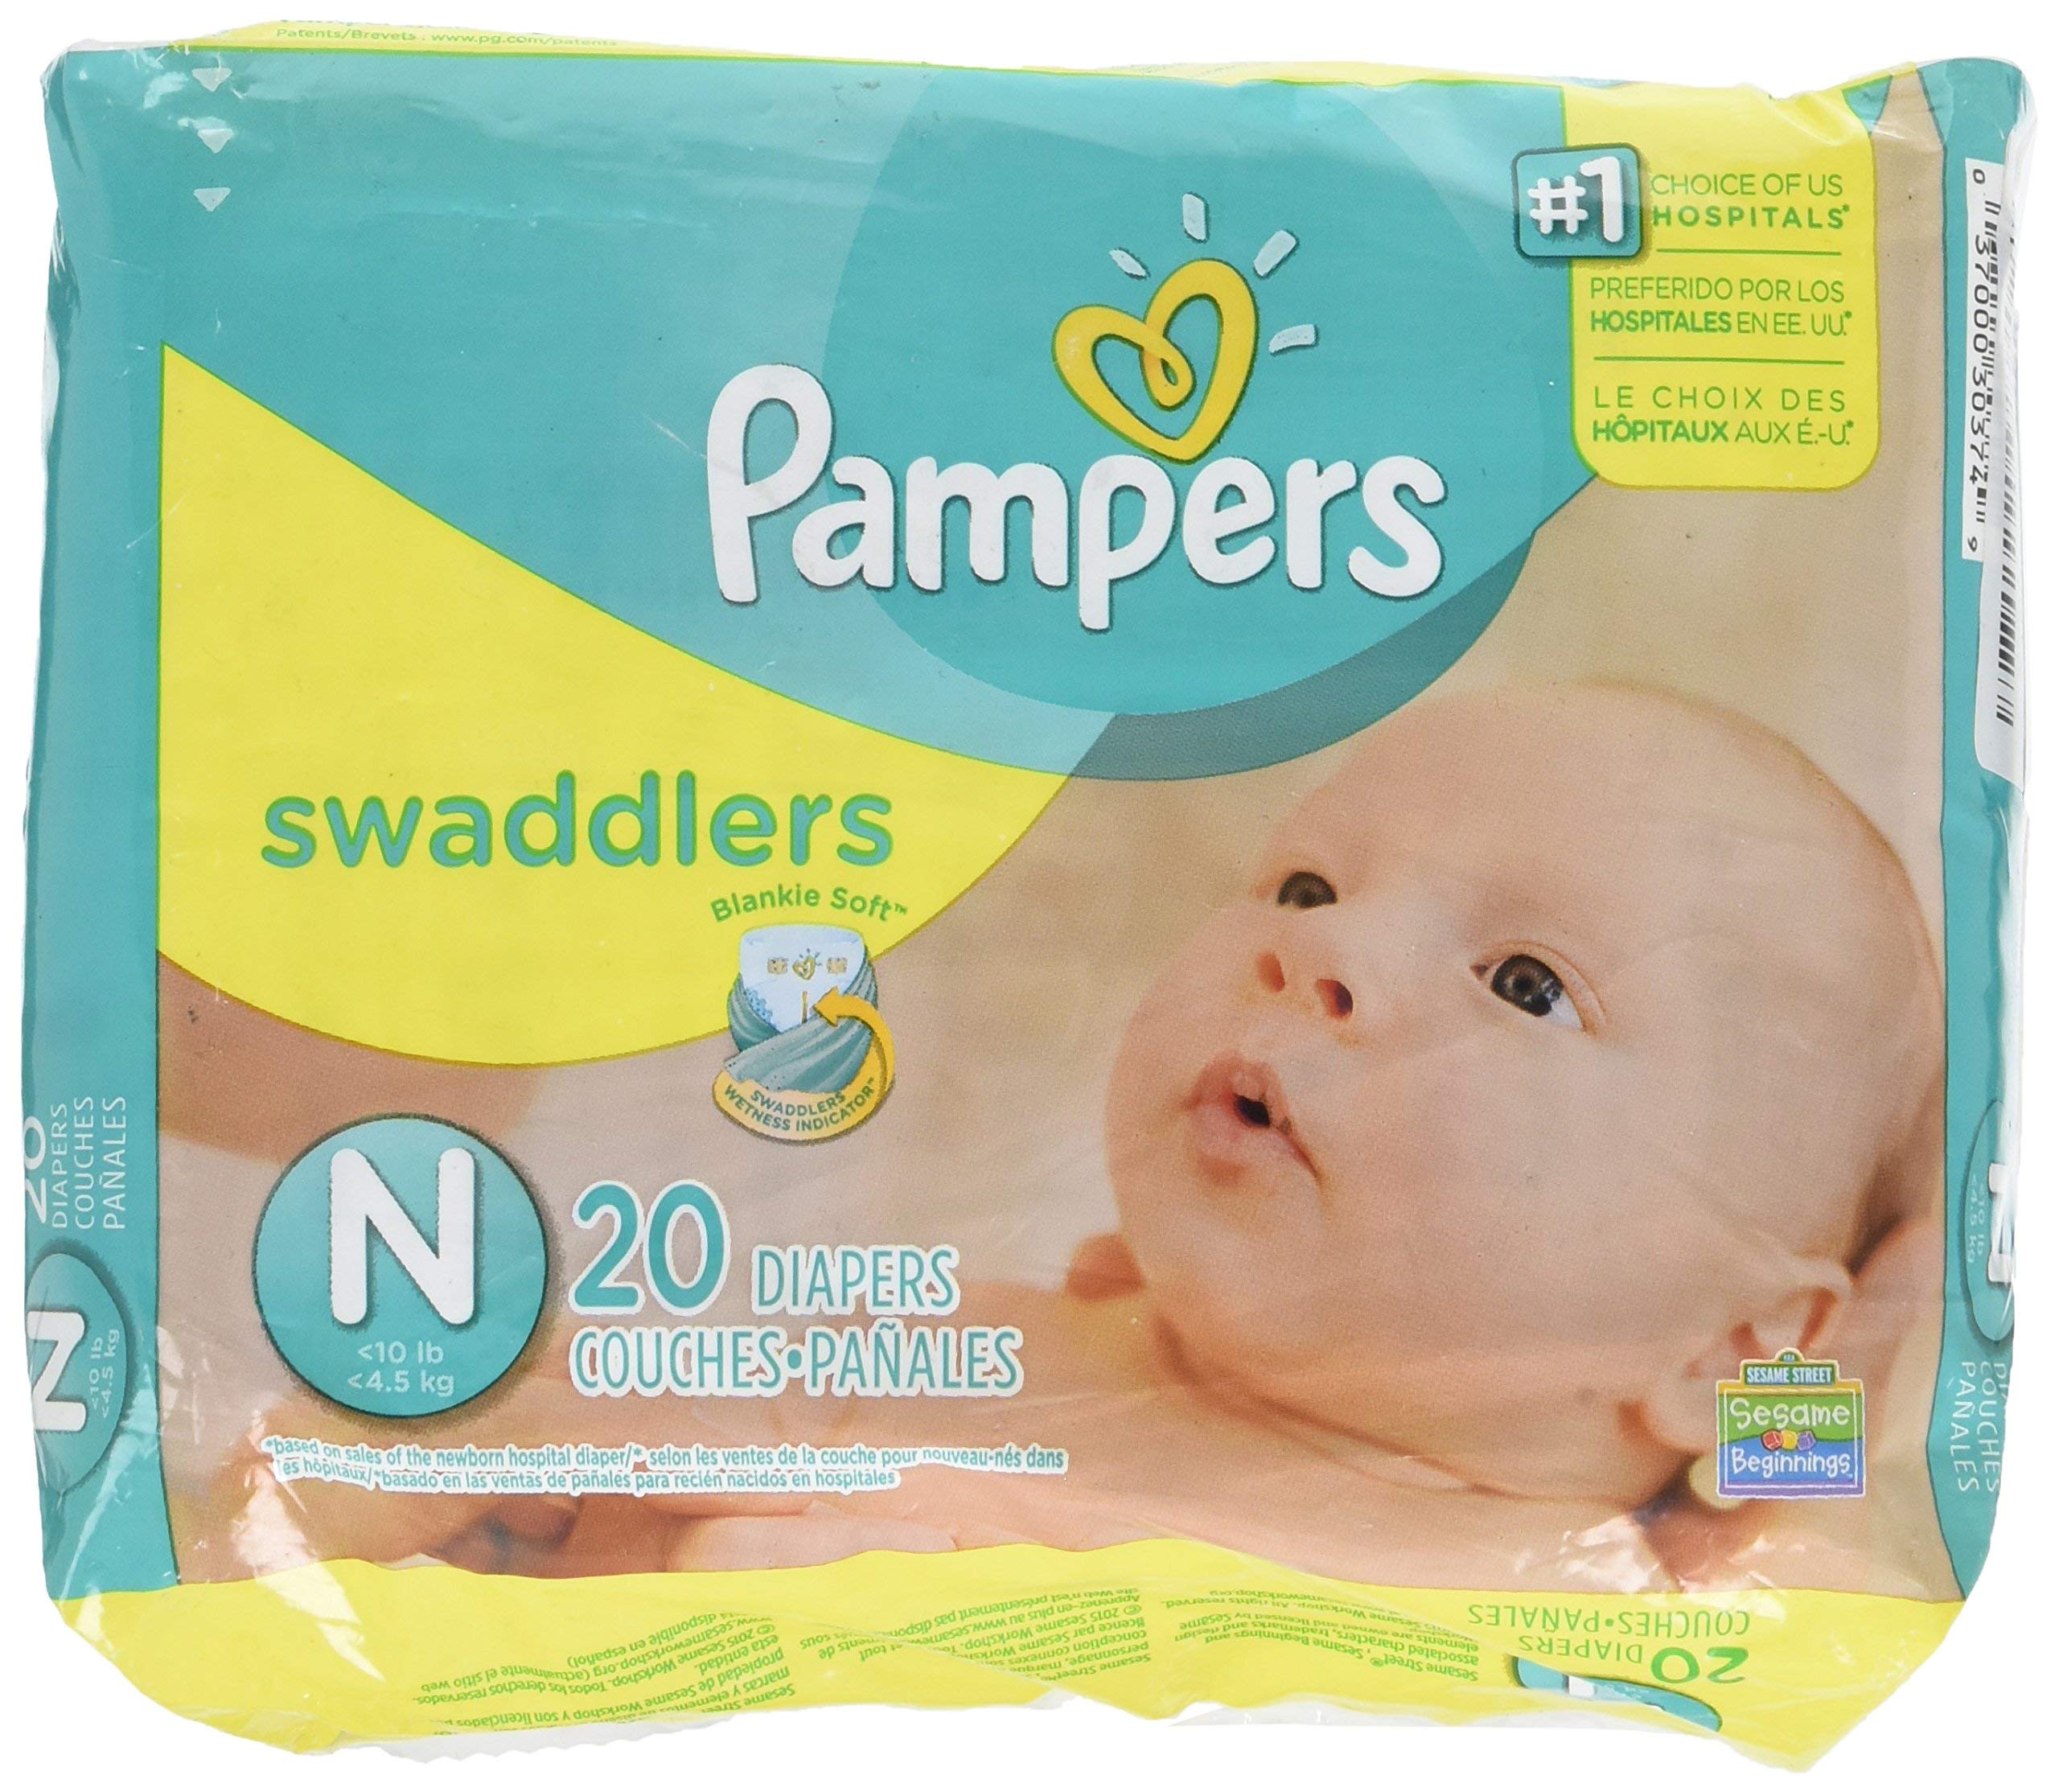 pampers pans 3